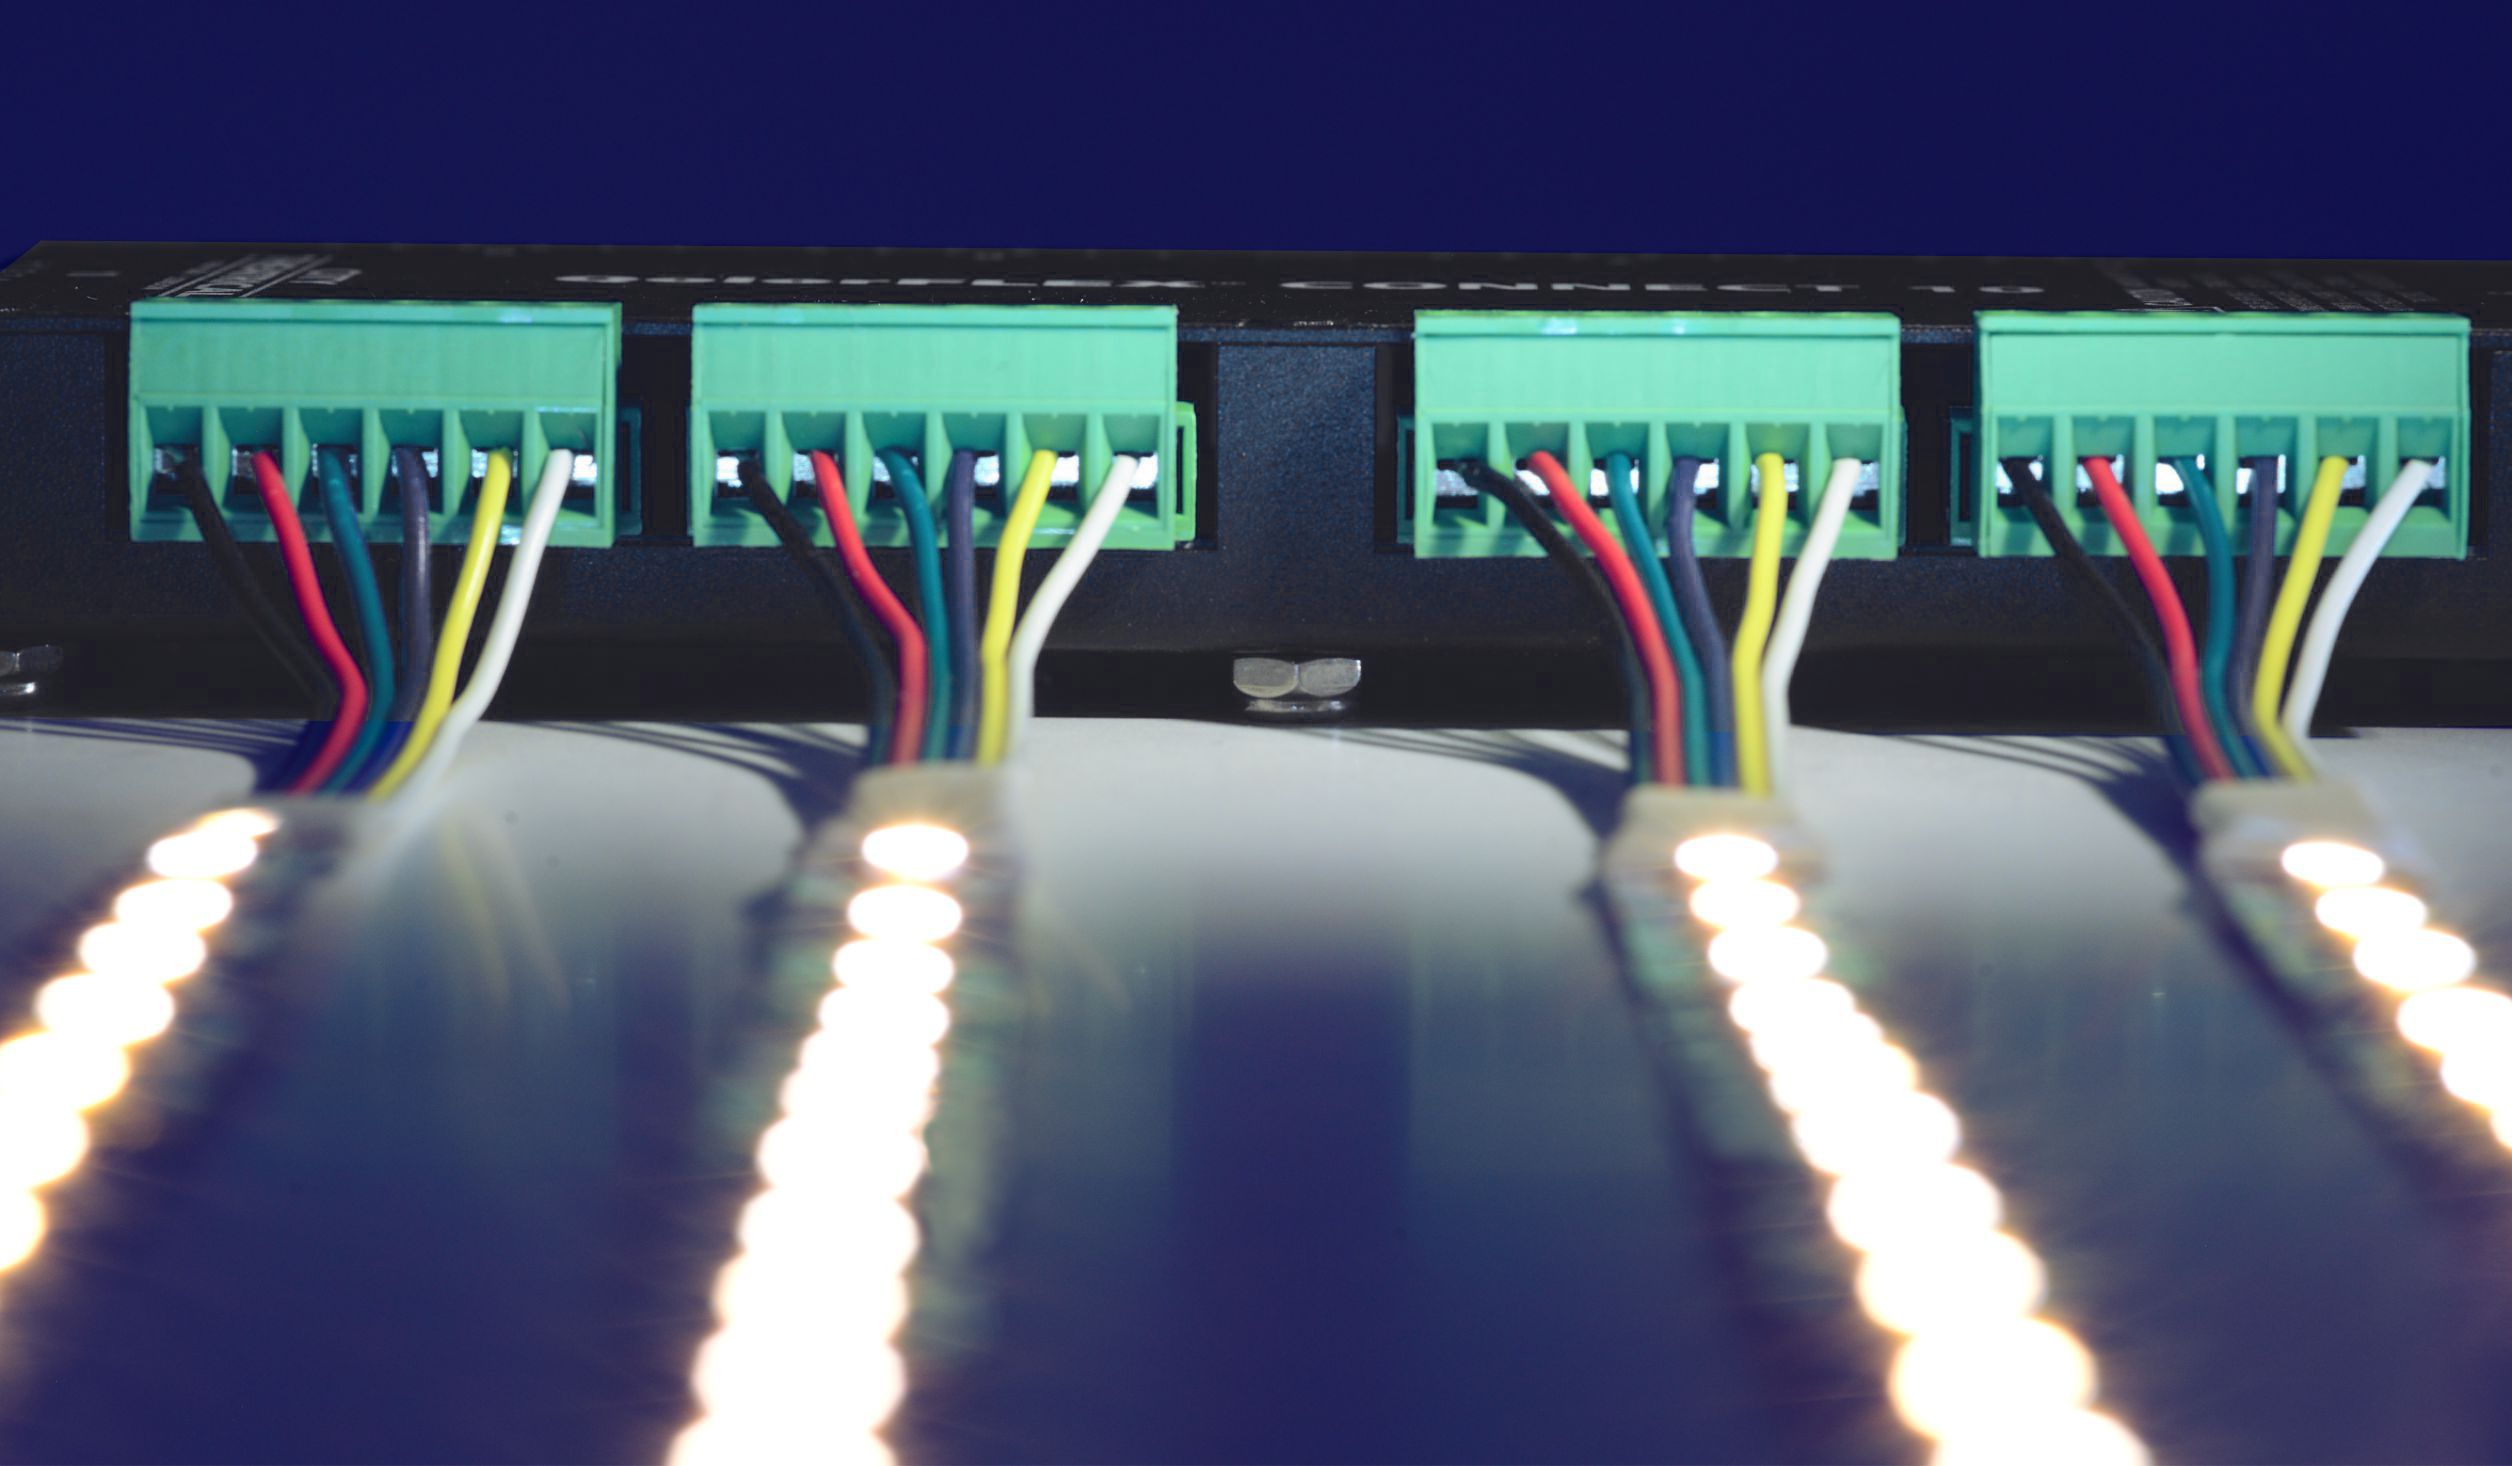 QolorFLEX Connect 10 uses 10 six position Phoenix terminal block connectors to achieve a quick and well-ordered installation.